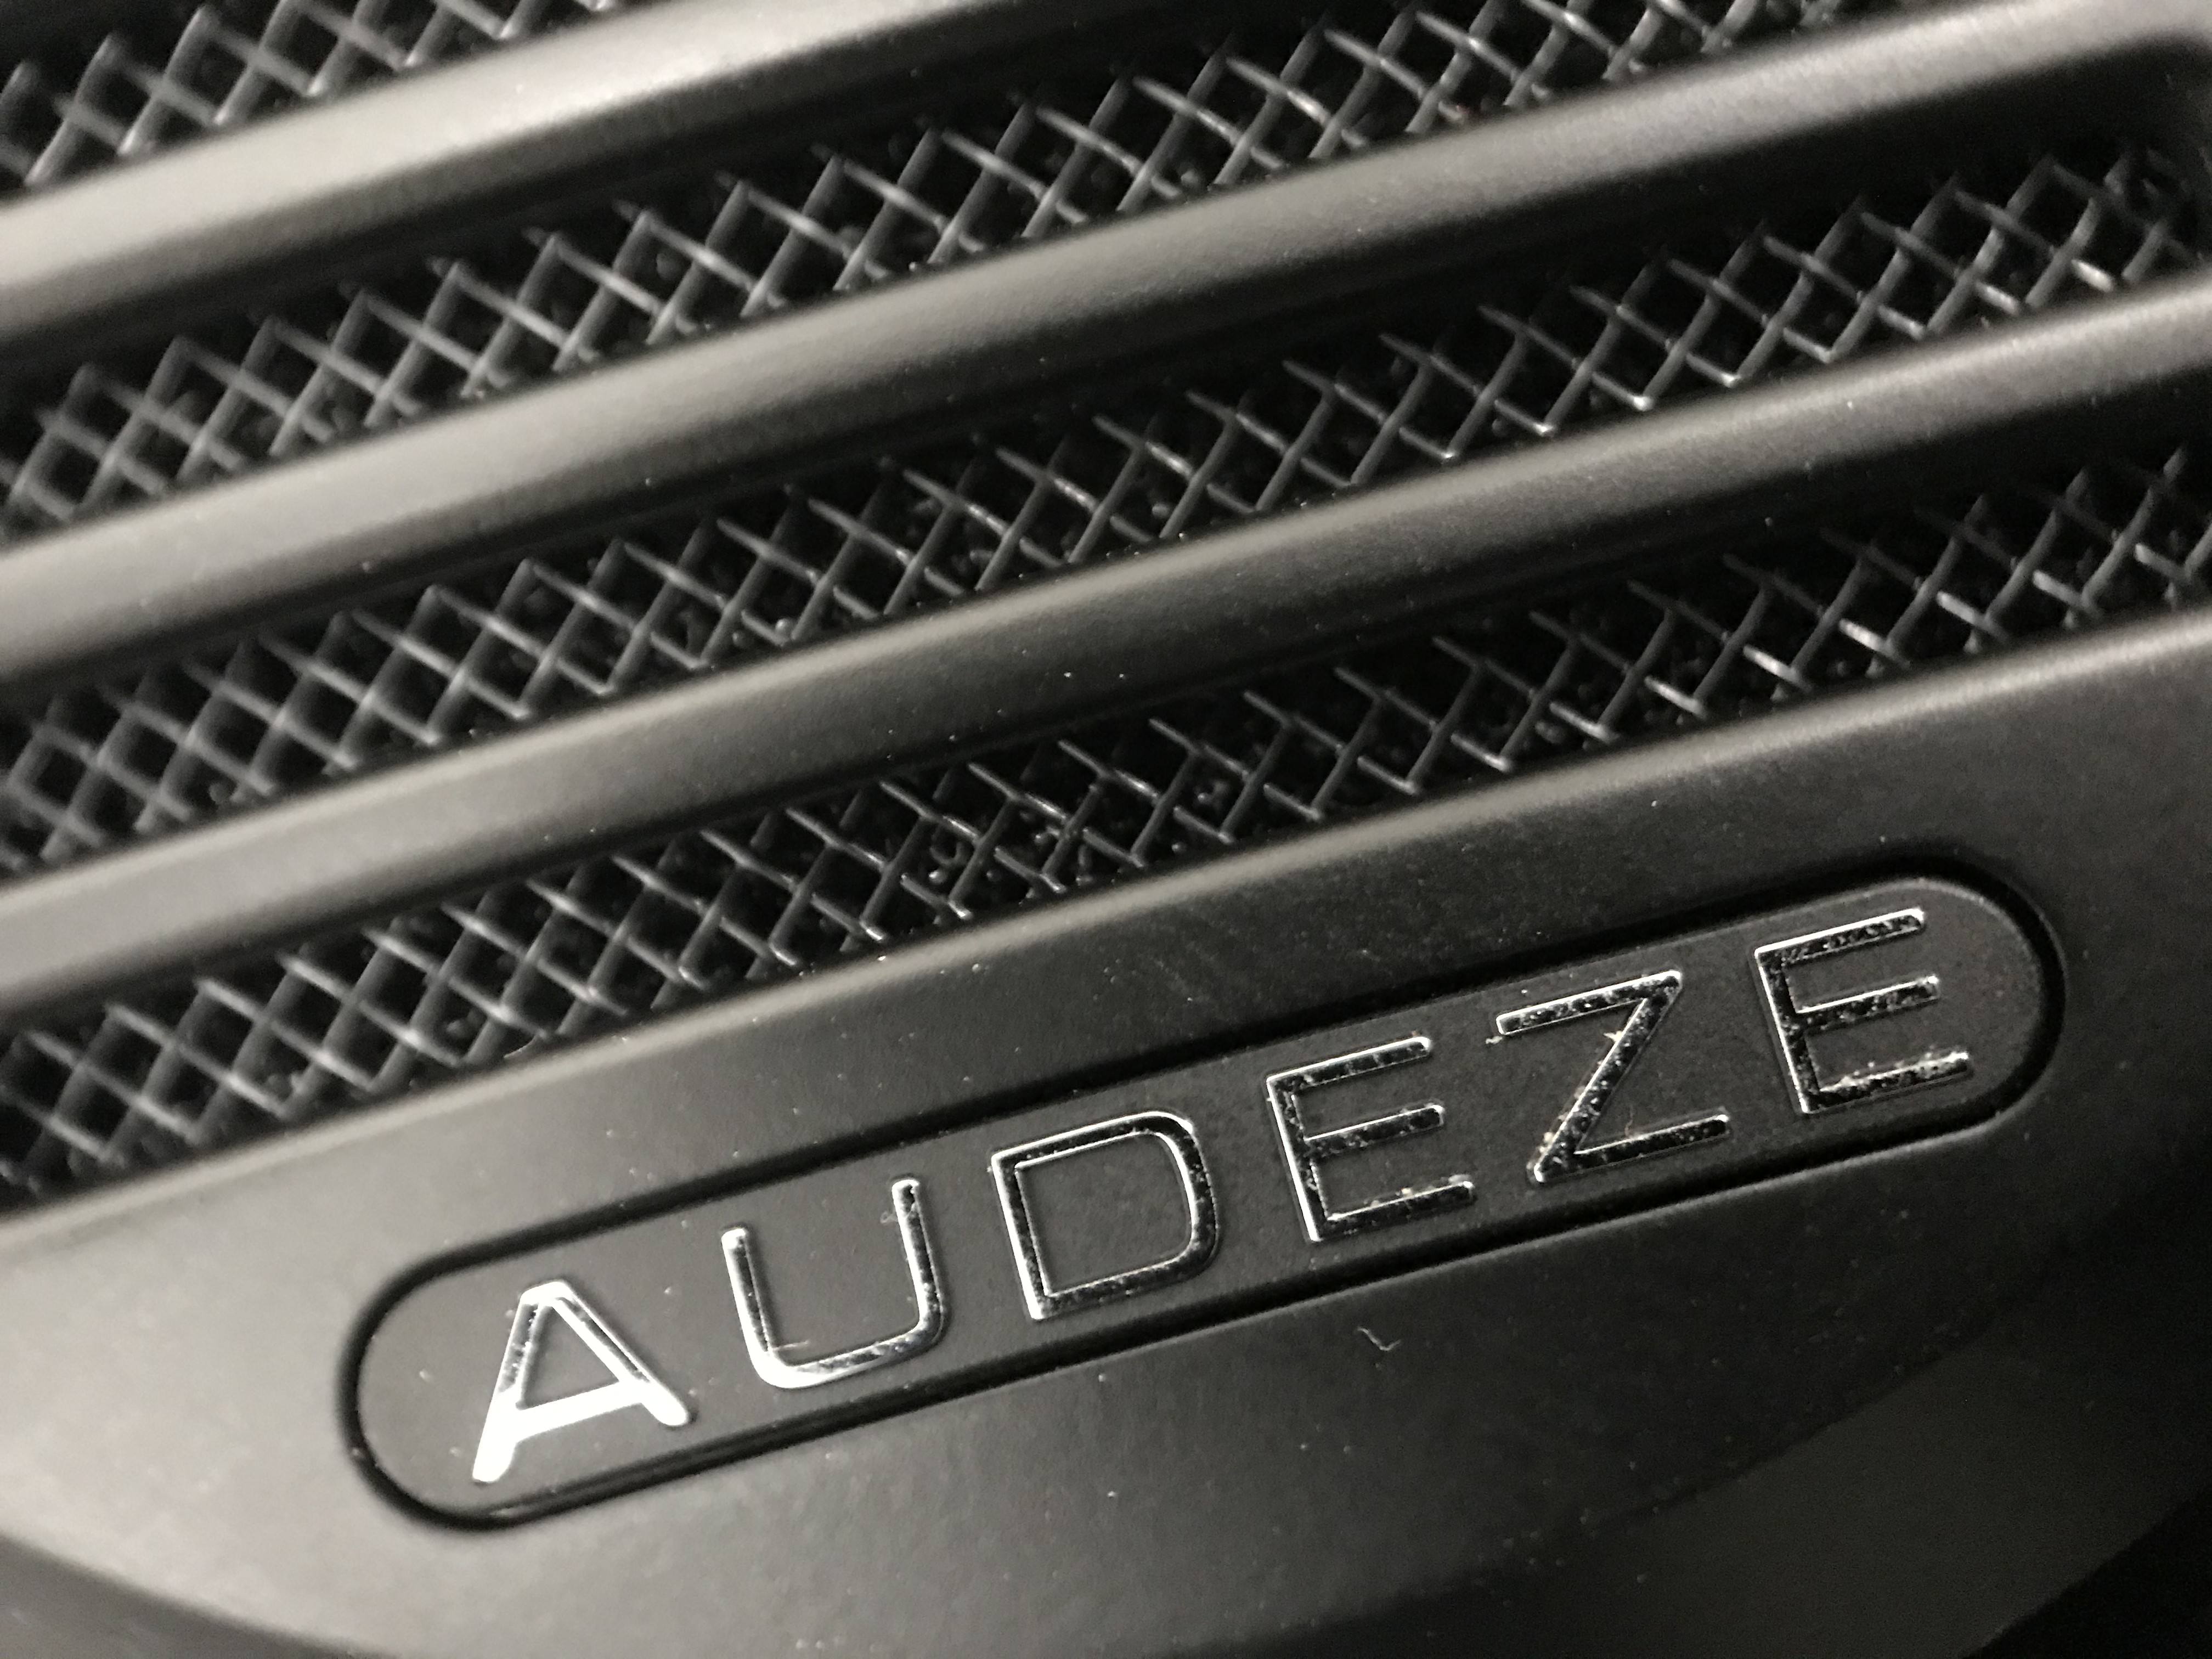 LCD-1 Headphones by Audeze, Top Notch Headphones For Work And Play